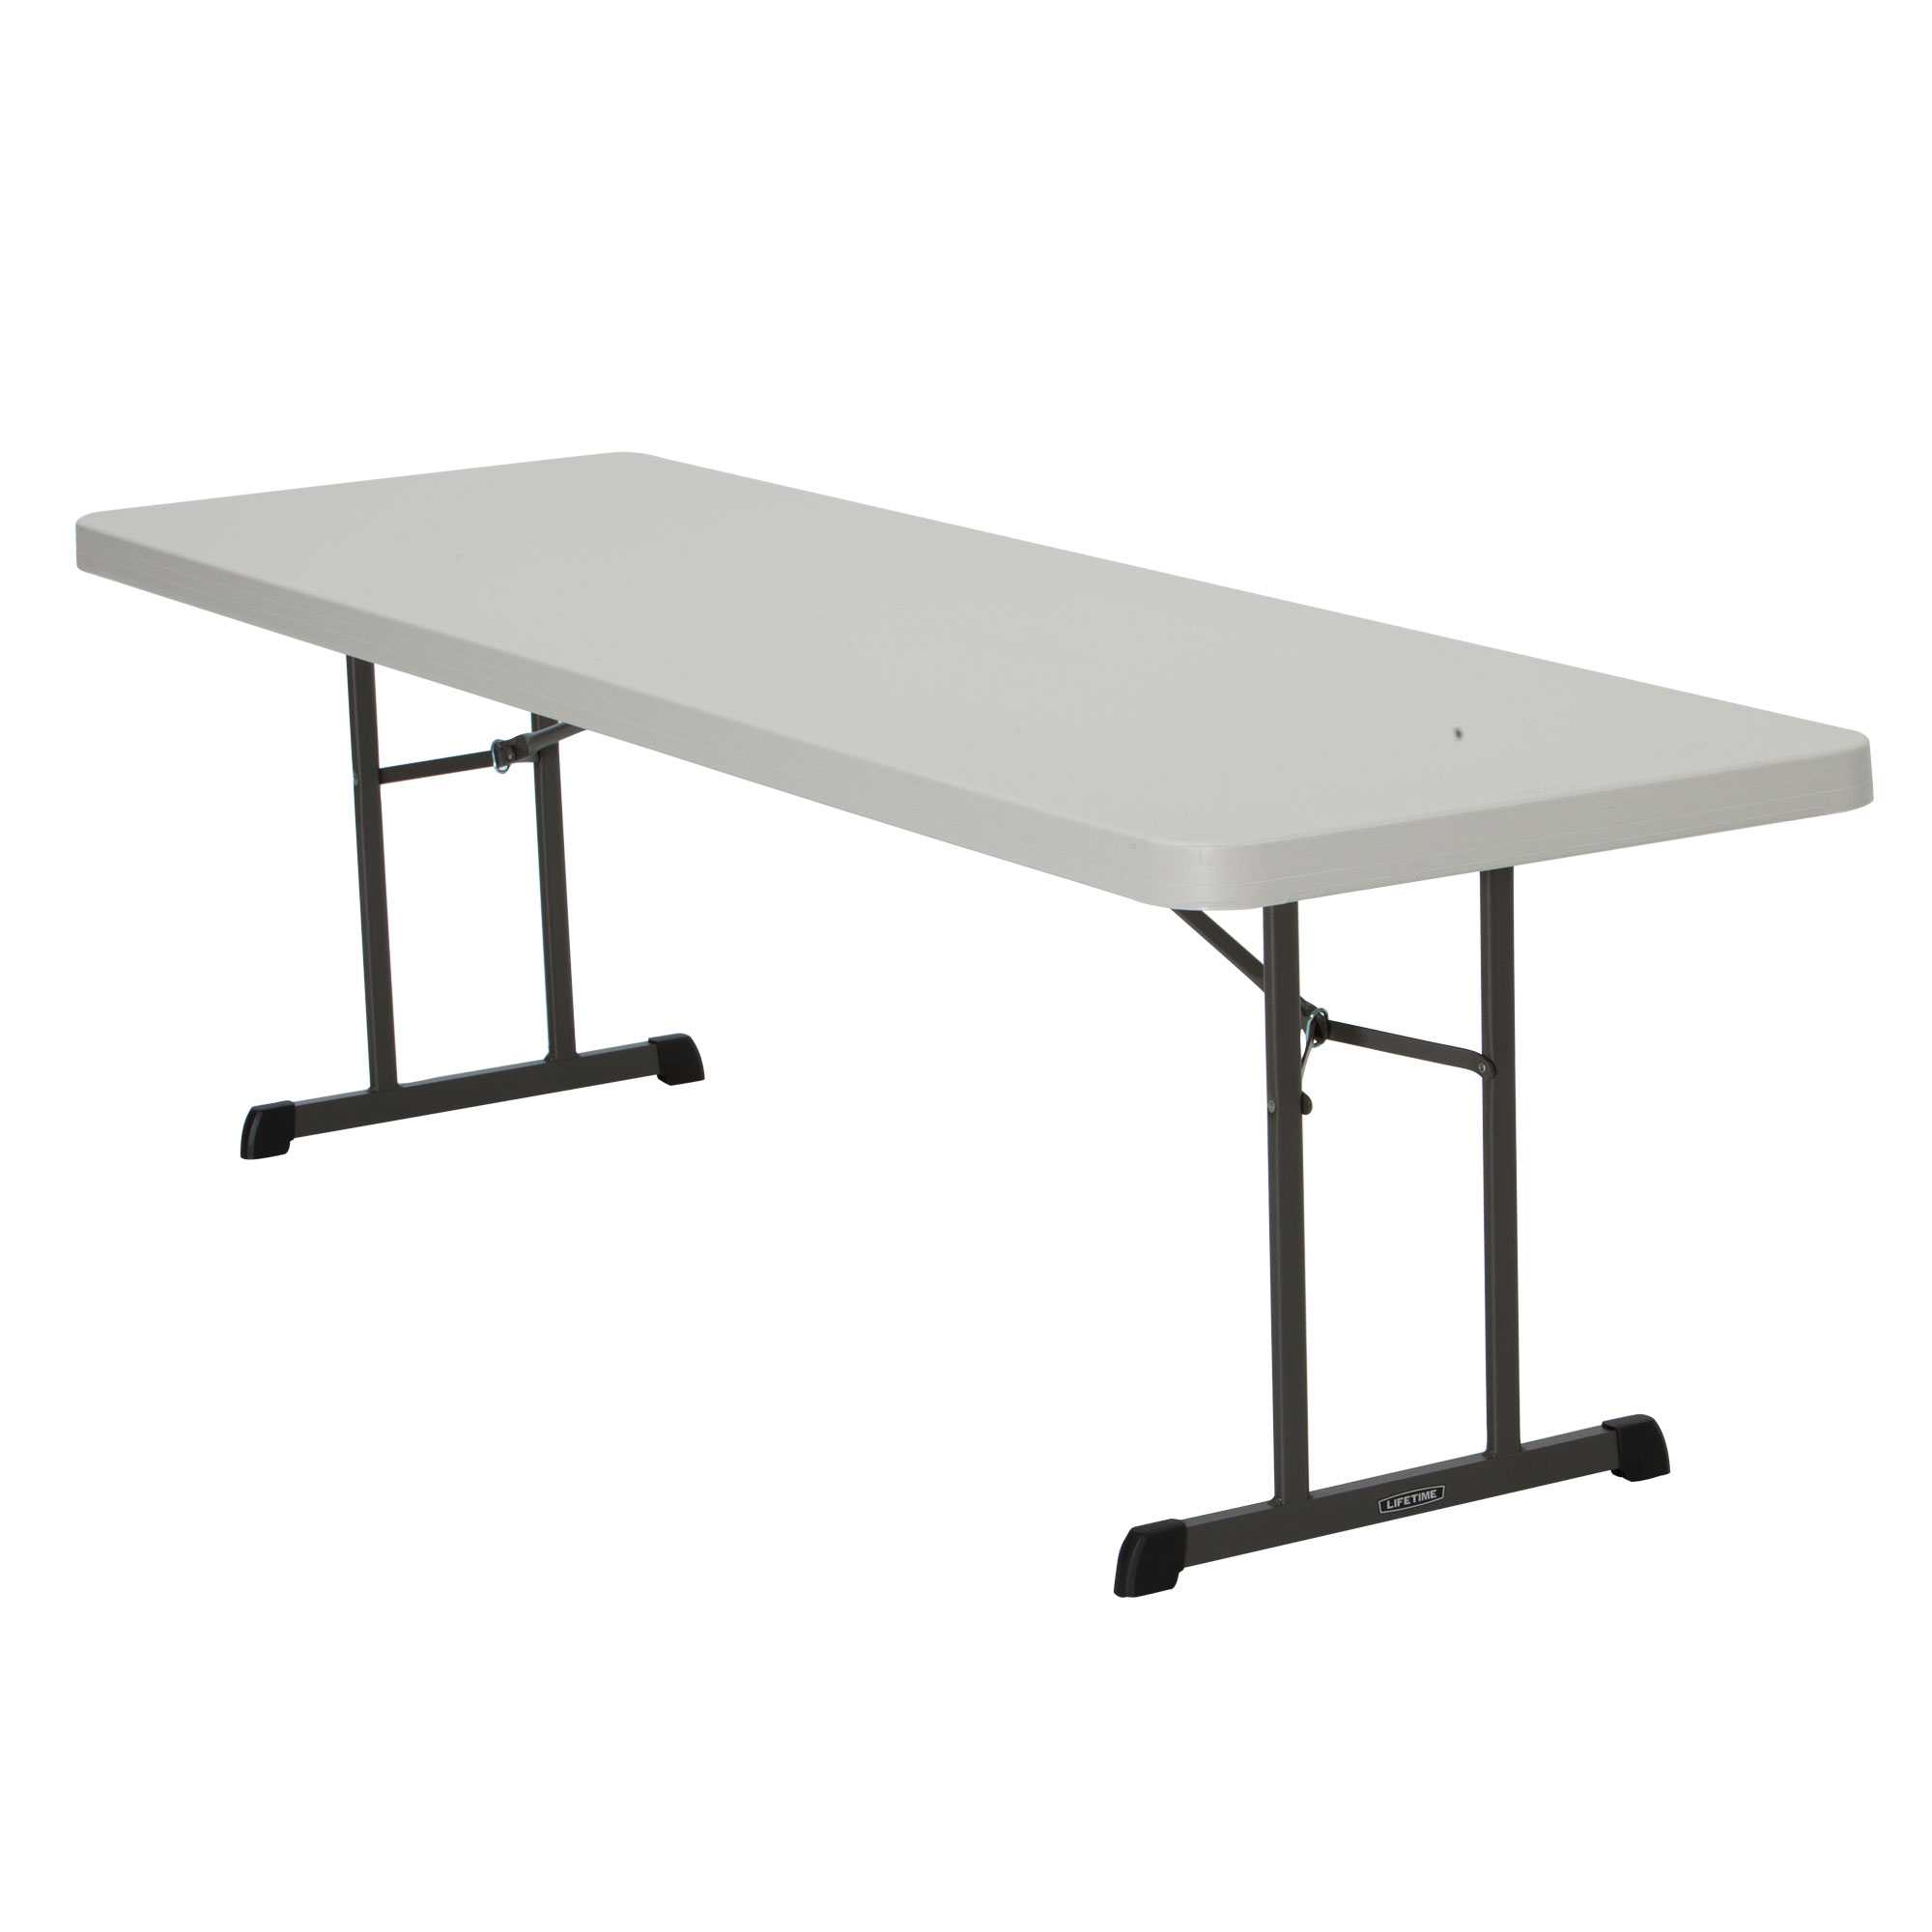 Lifetime 8 Foot Rectangle Folding Table Indoor/Outdoor Professional Grade, Almond (80250) - image 2 of 10